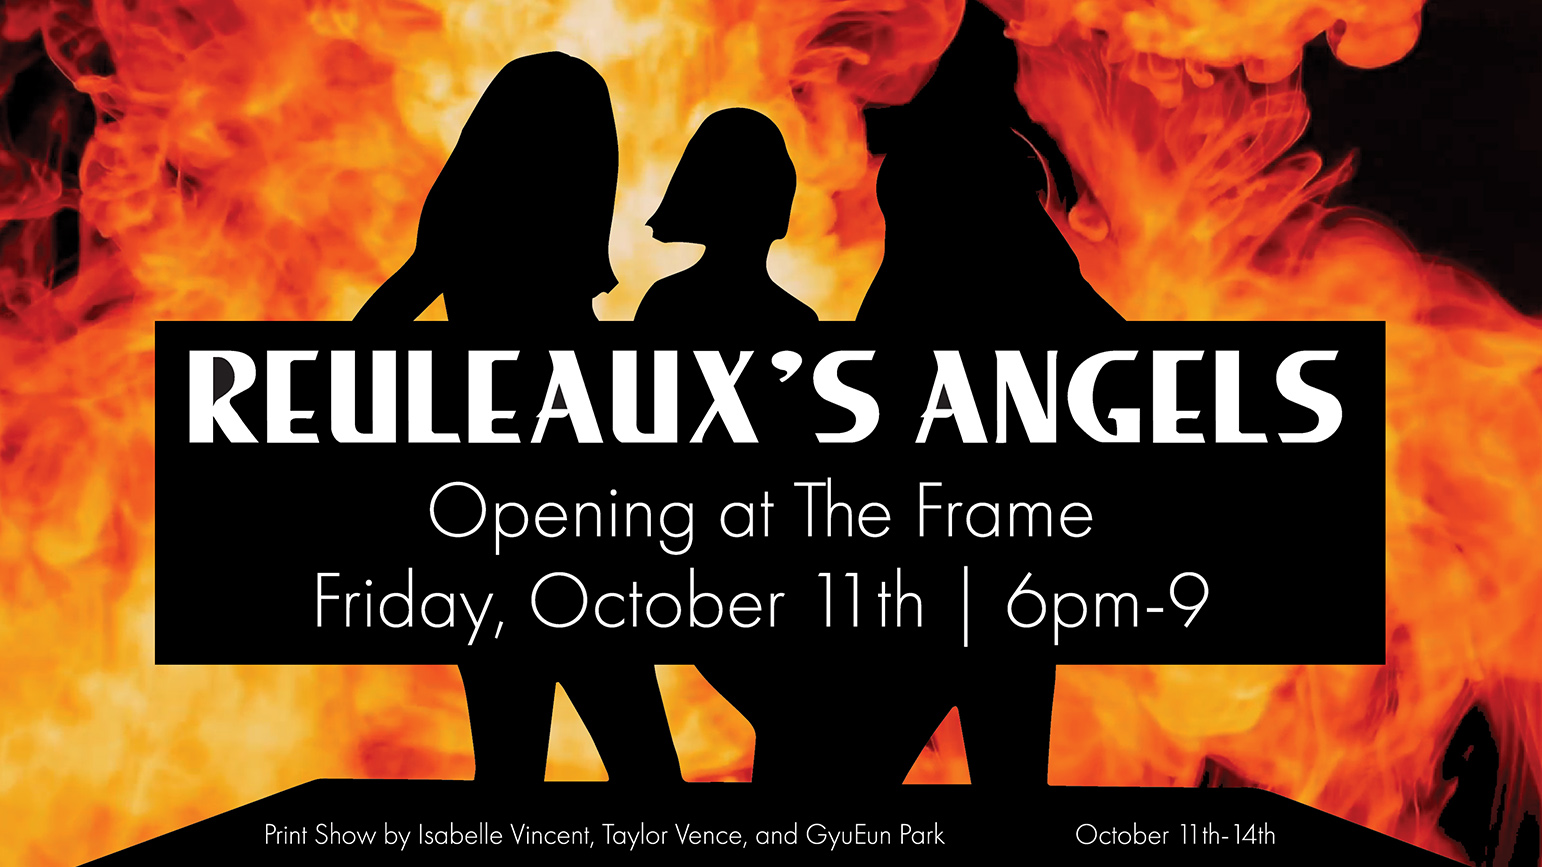 Three silhouettes against flames with the words "Reauleaux's Angels" superimposed on top